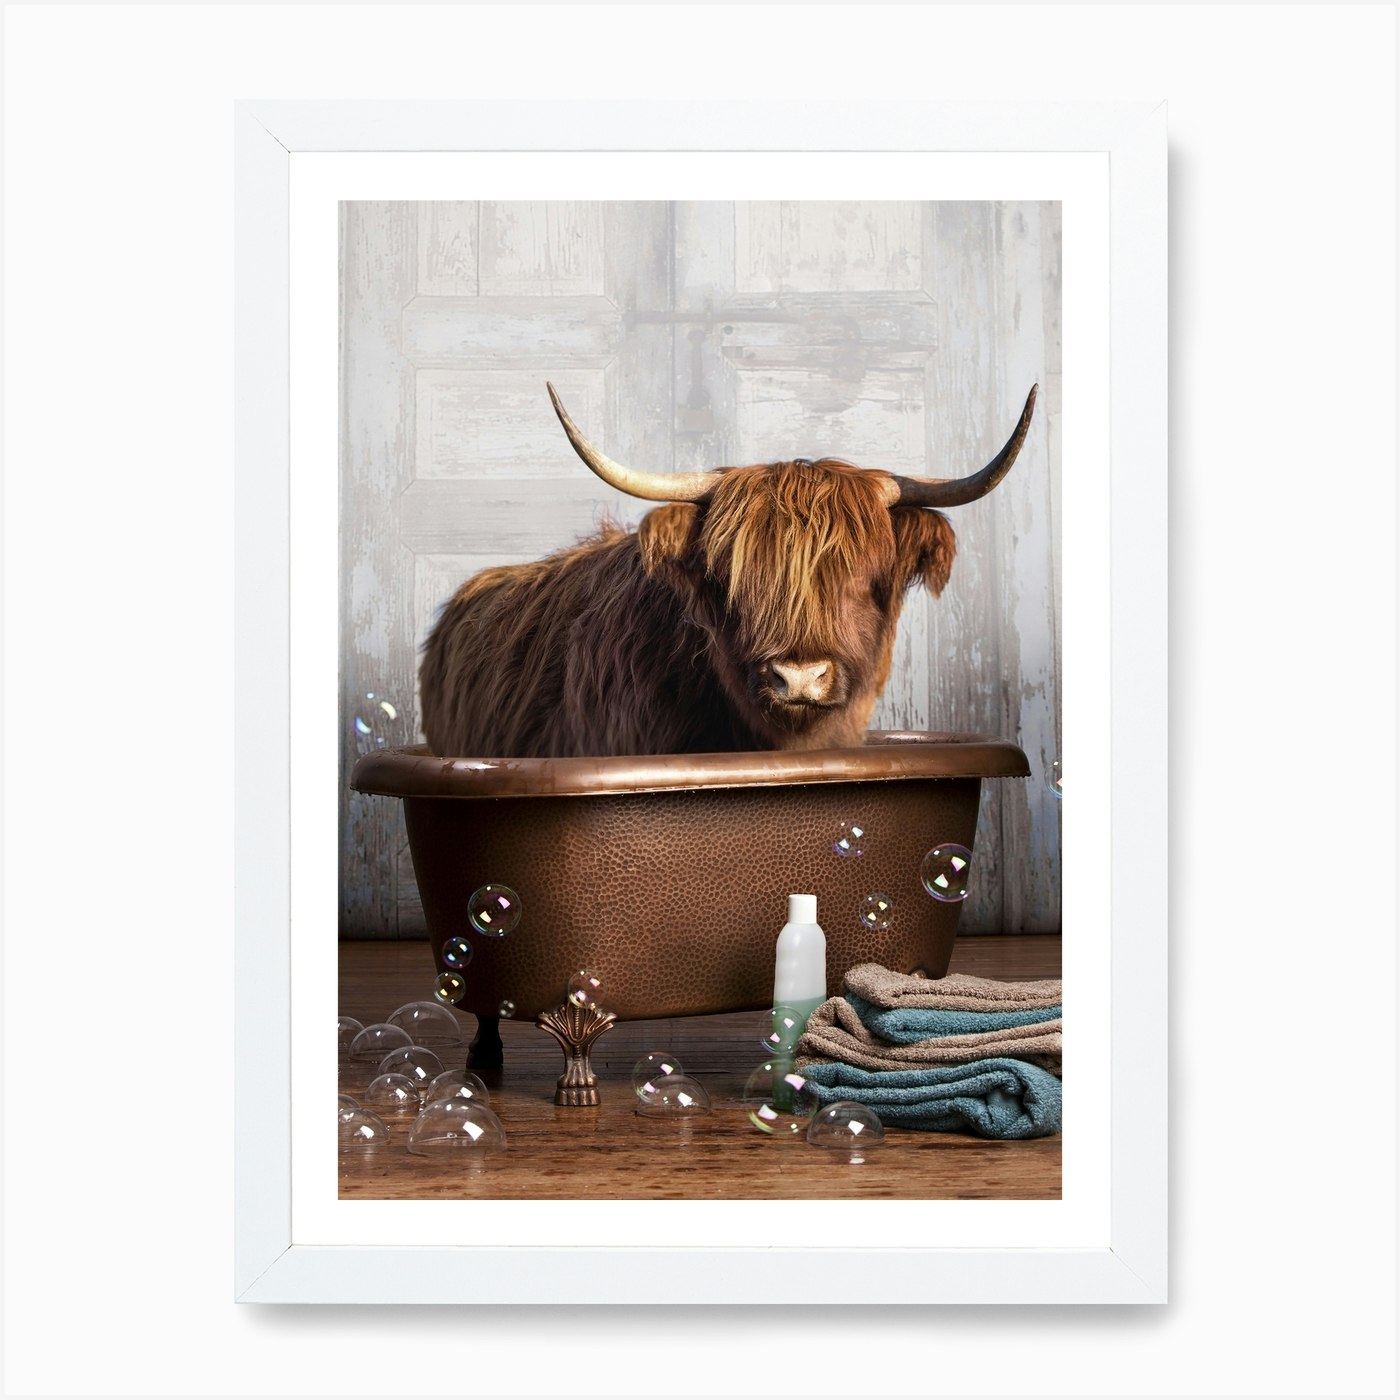 Baby Coo Bamboo Spoons, Hairy Coo